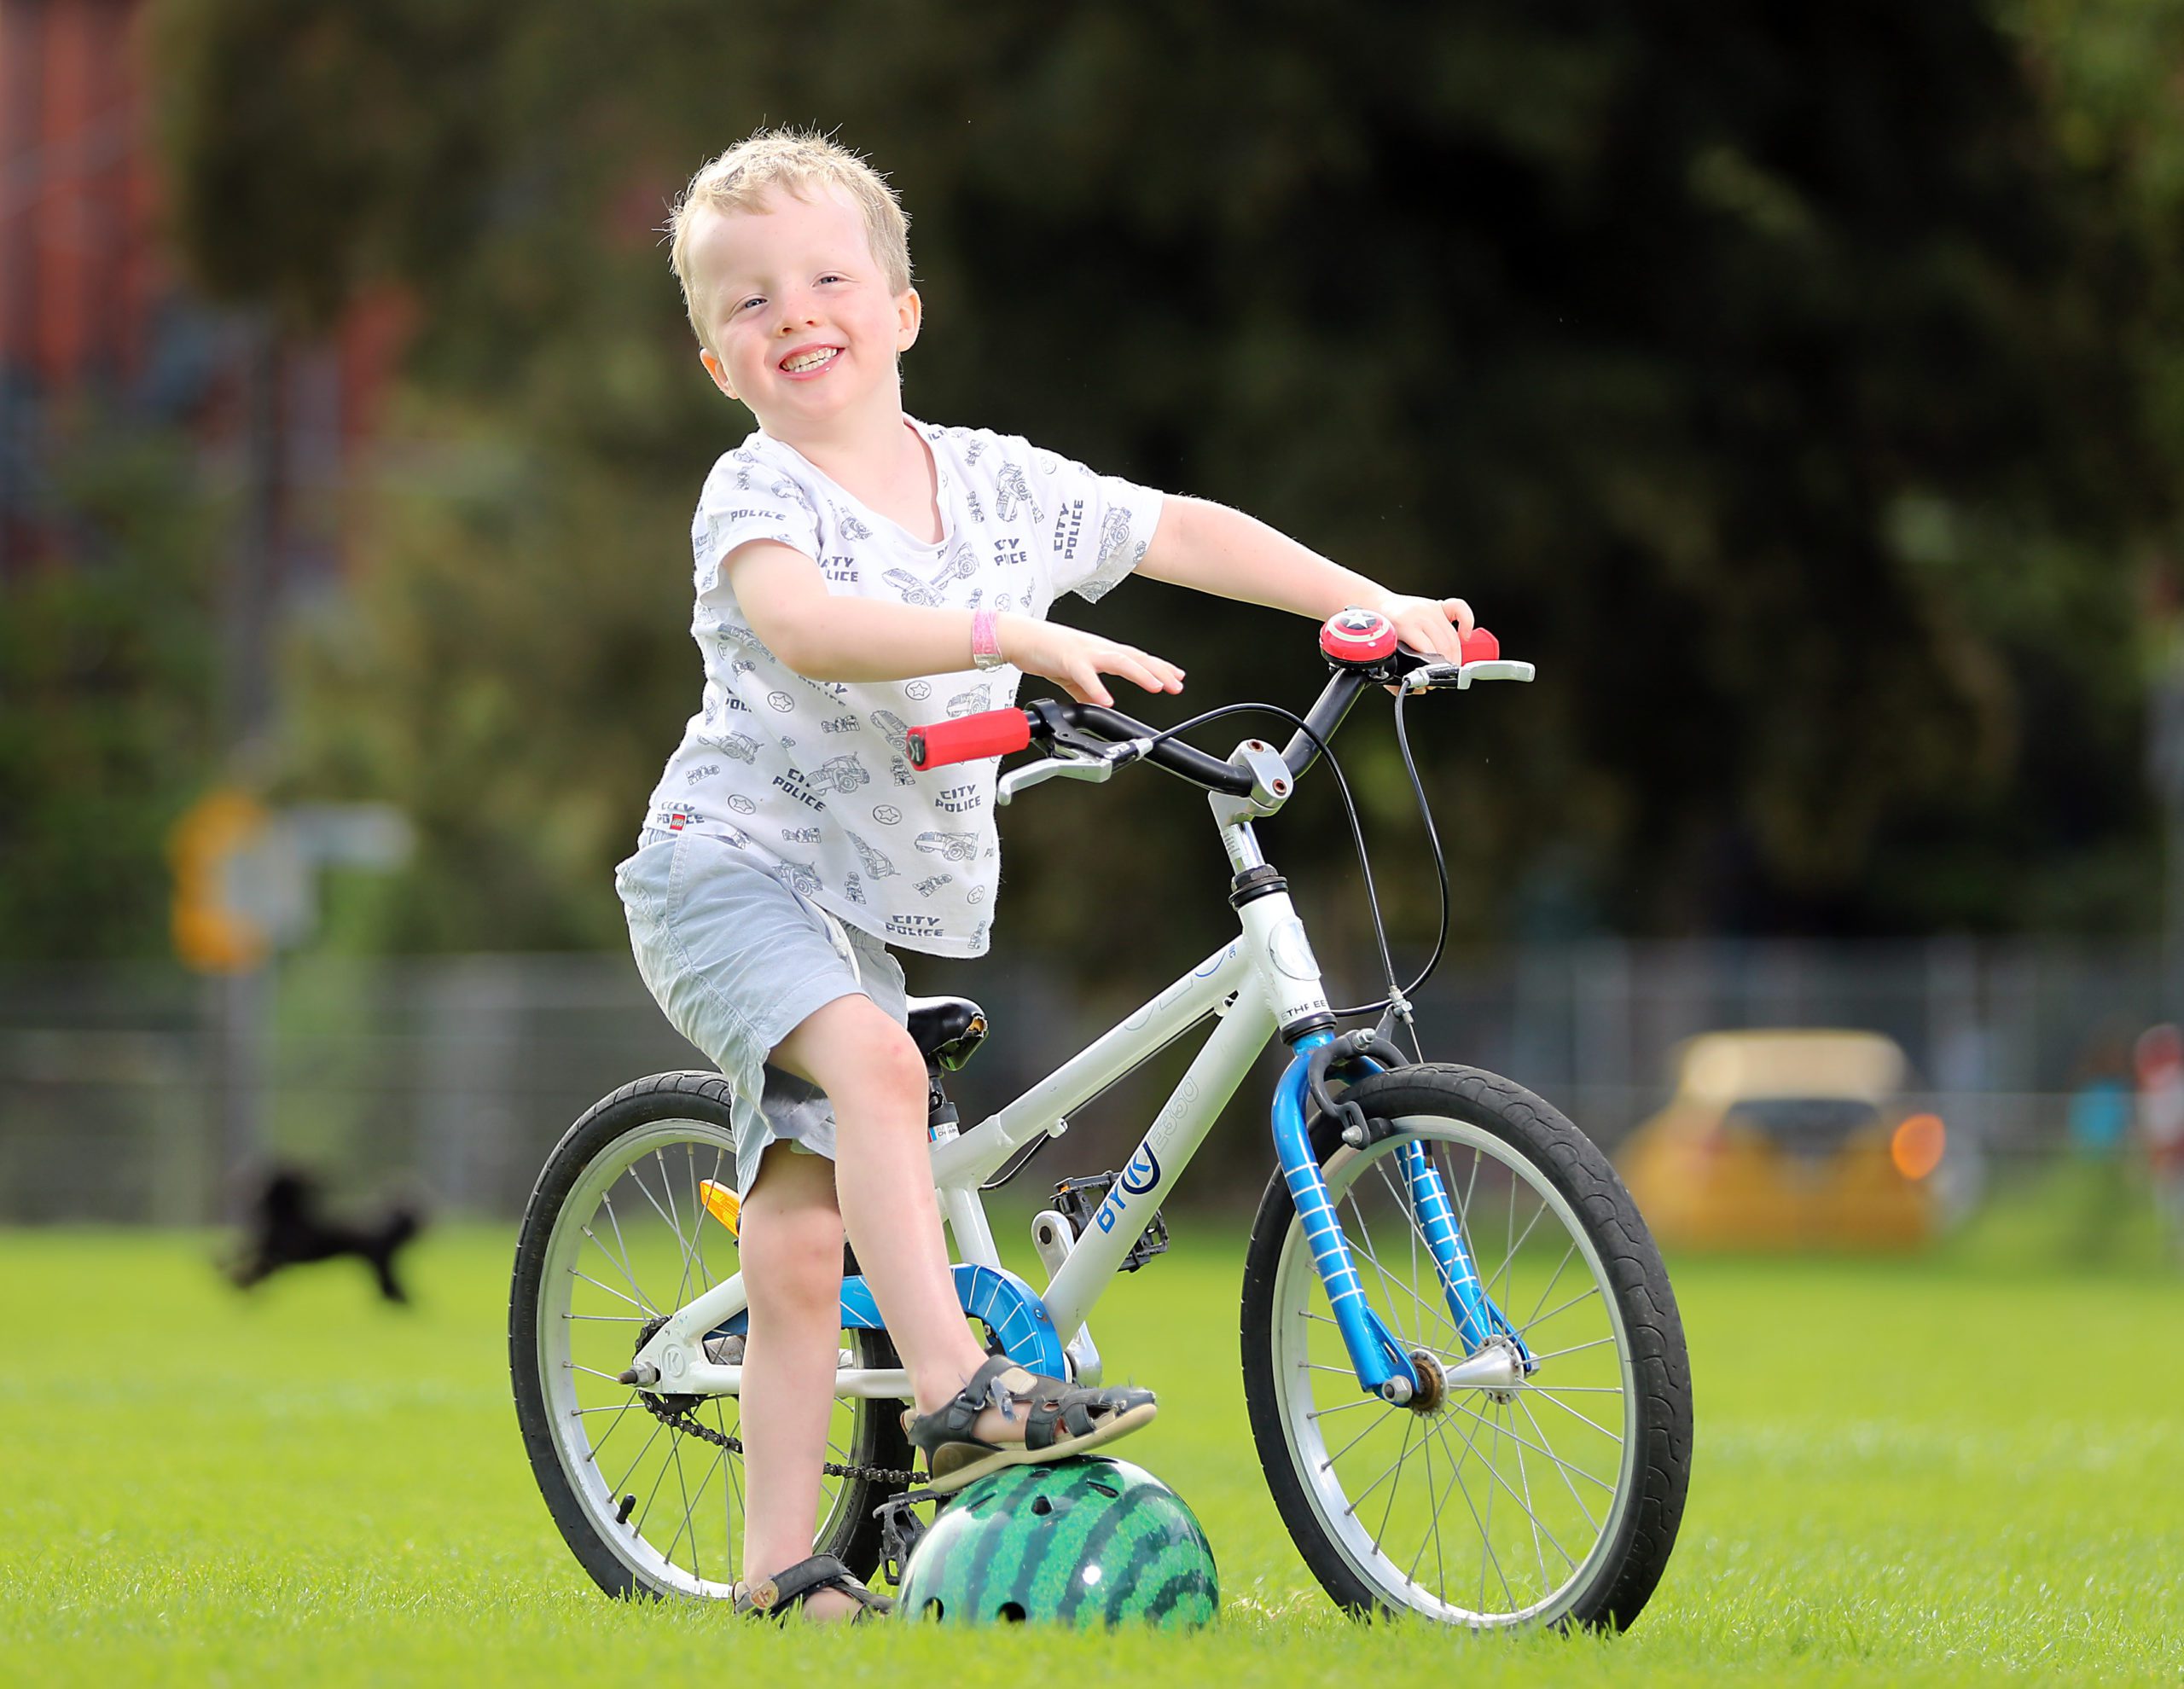 Jack sitting on his bike in a park